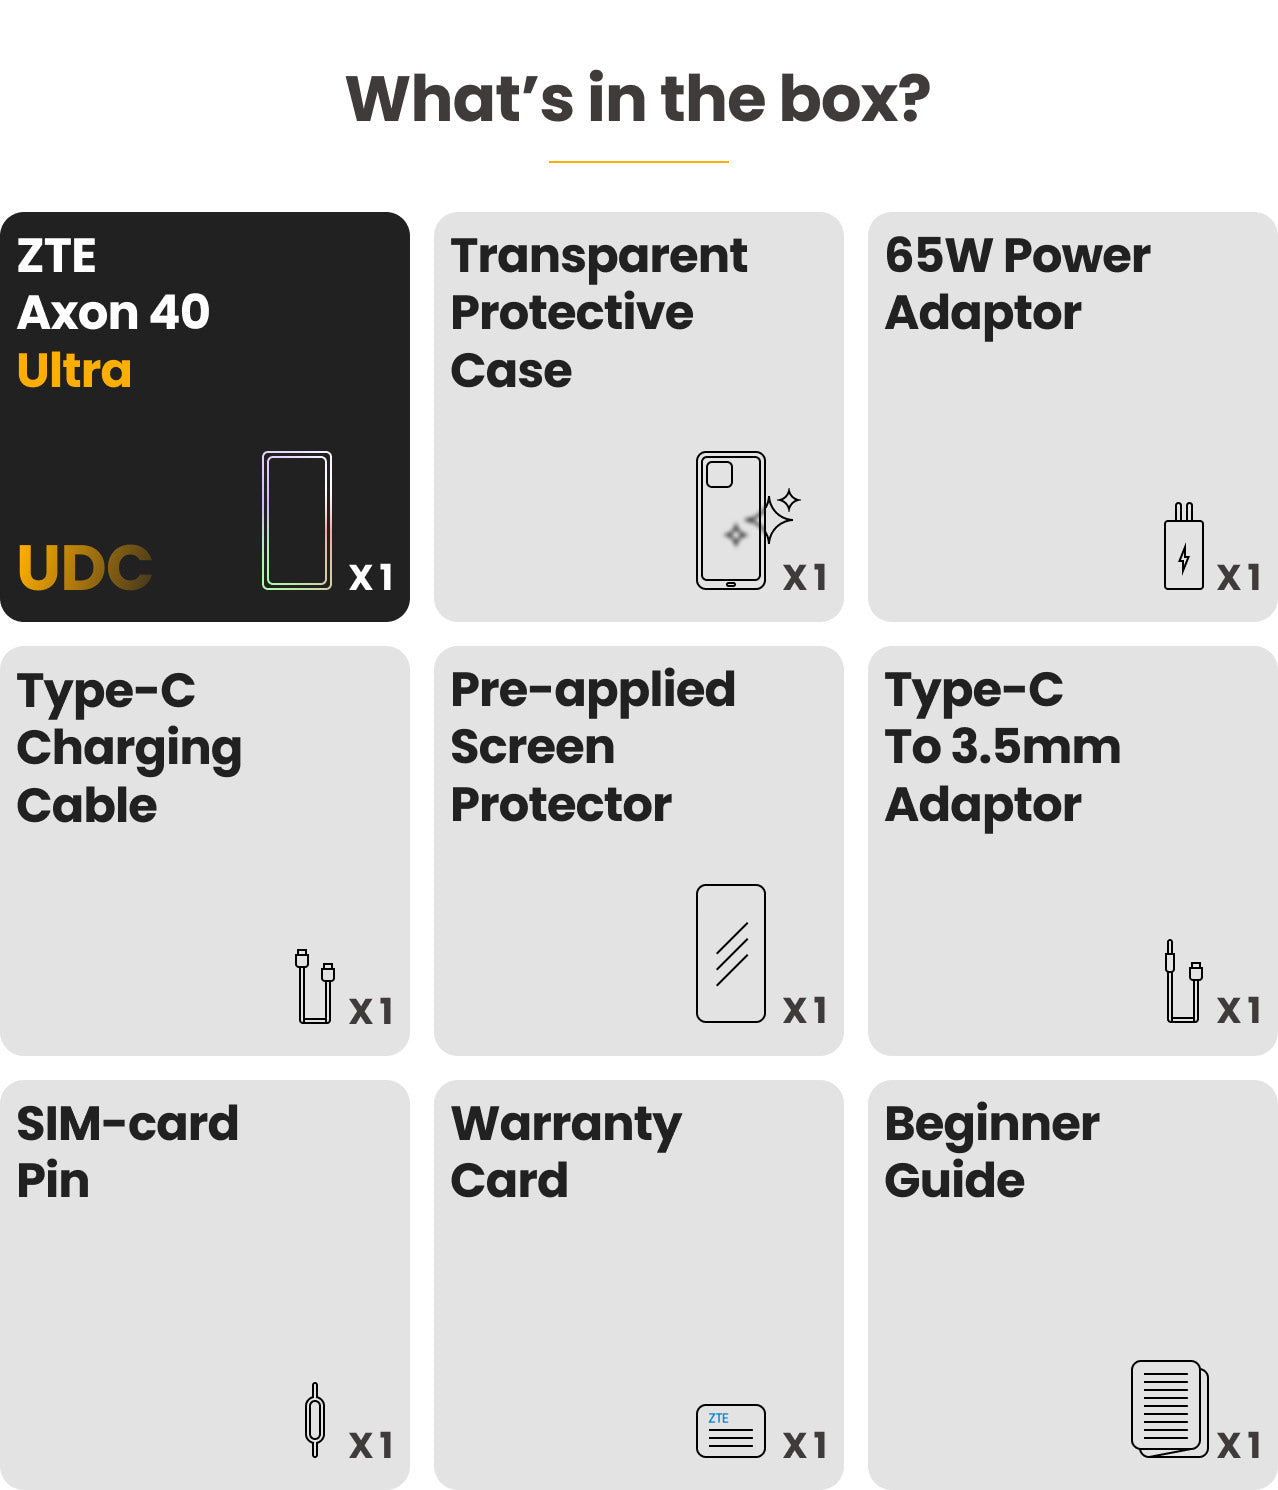 What’s in the box: 1/ One ZTE Axon 40 Ultra; 2/ One Transparent Protective Case; 3/One 65W Power Adaptor; 4/One Type-C Charging Cable; 5/ One Pre-applied Screen Protector; 6/ One Type-C to 3.5mm Adaptor; 7/ One SIM-card Pin; 8/ One Warranty Card; 9/ One Beginner Guide